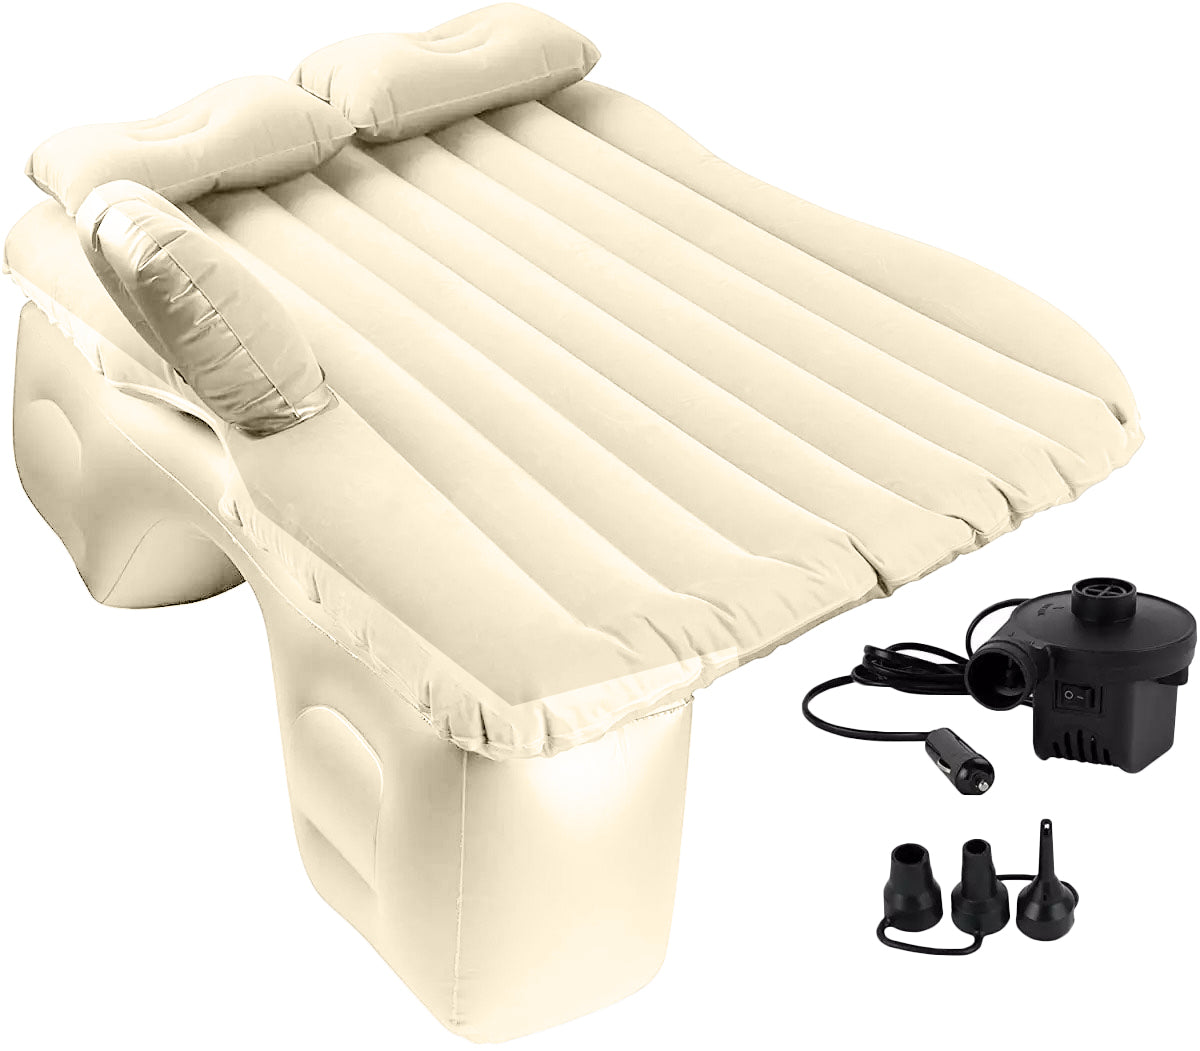 The Car Bed Mattress - Turn Your Car into Bed